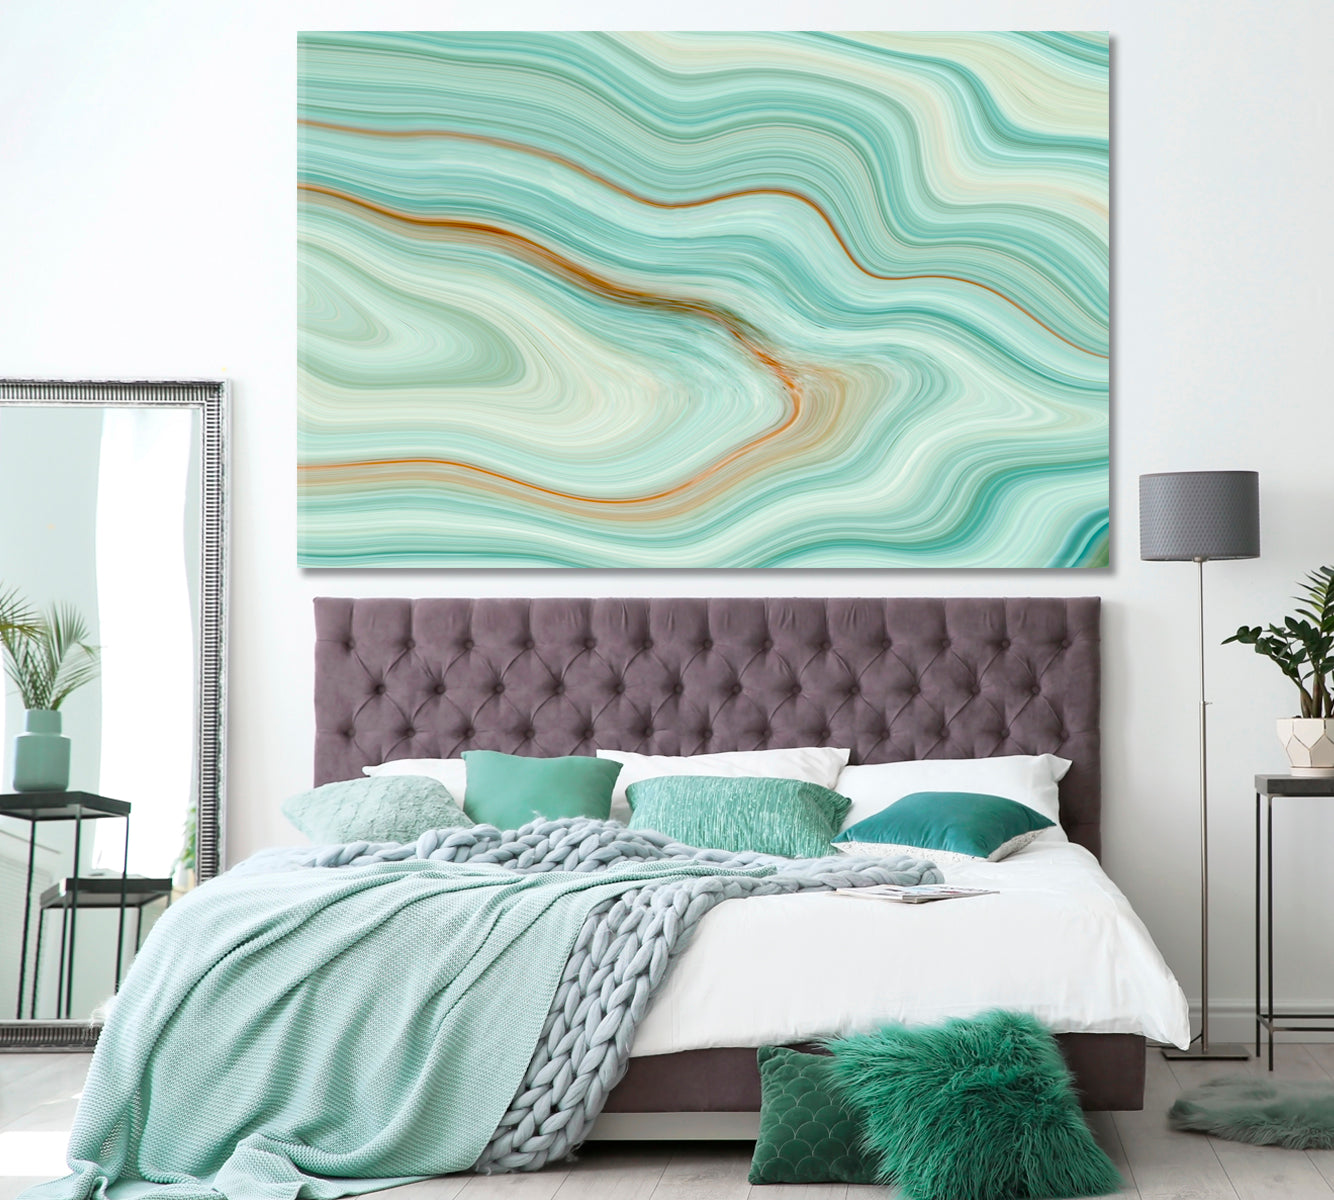 Wavy Marble or Ripple Agate Canvas Print ArtLexy 1 Panel 24"x16" inches 